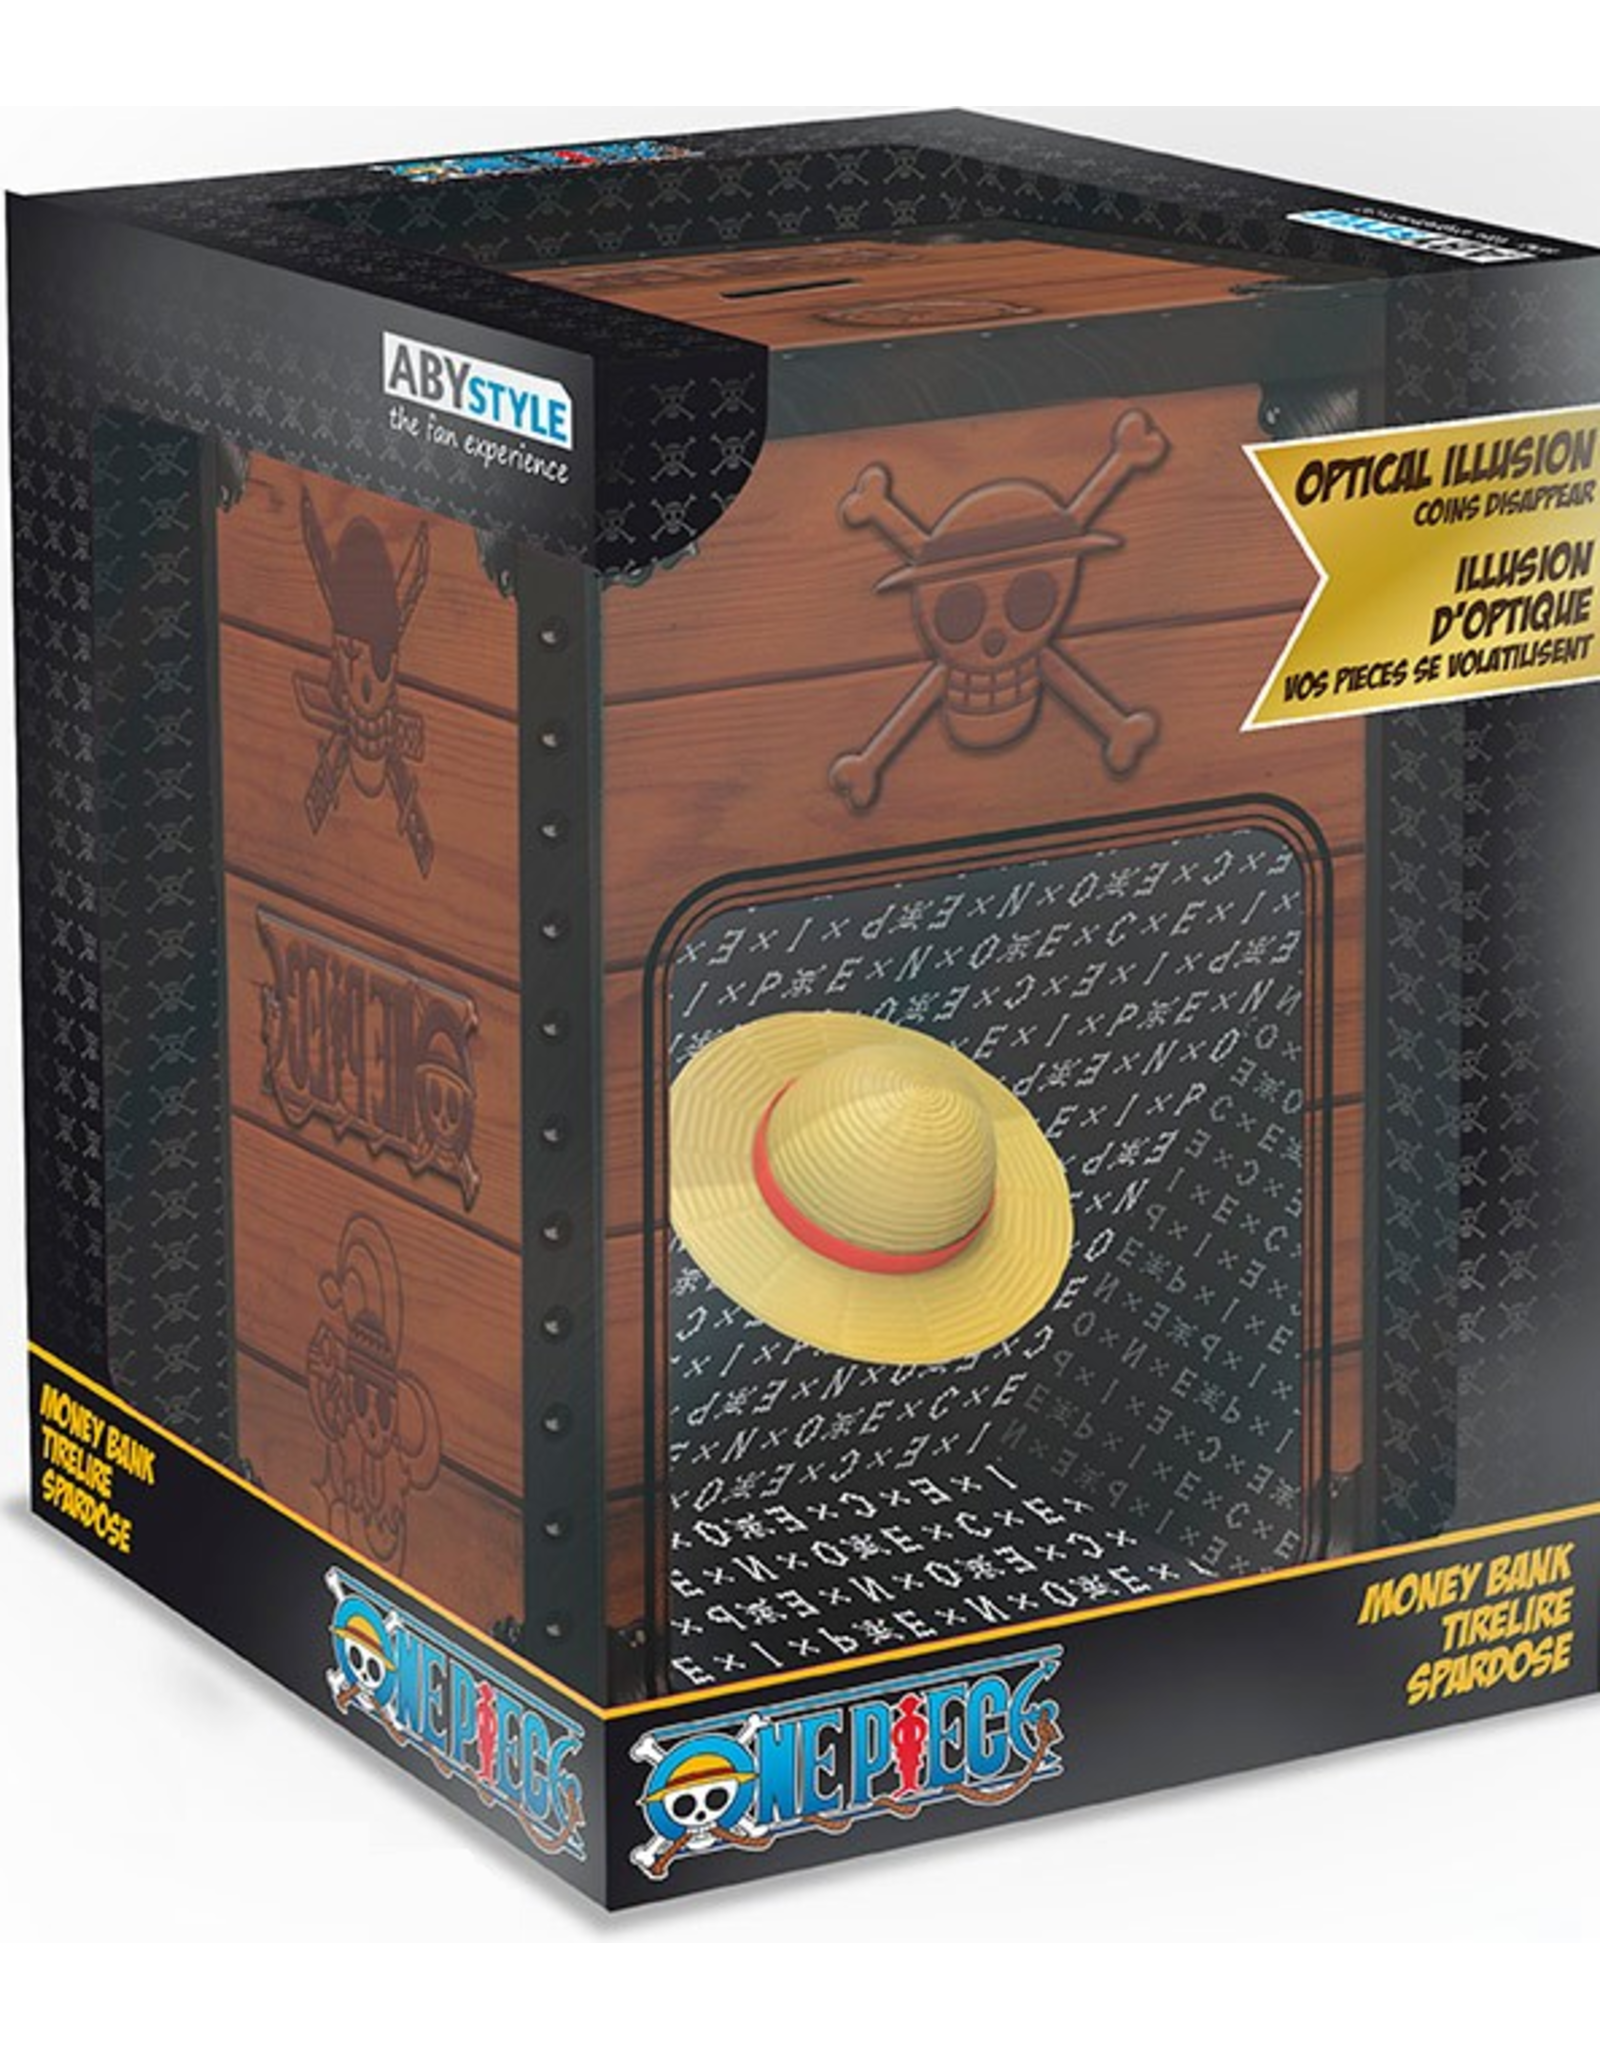 Abysse America One Piece - Straw Hat Coin Bank